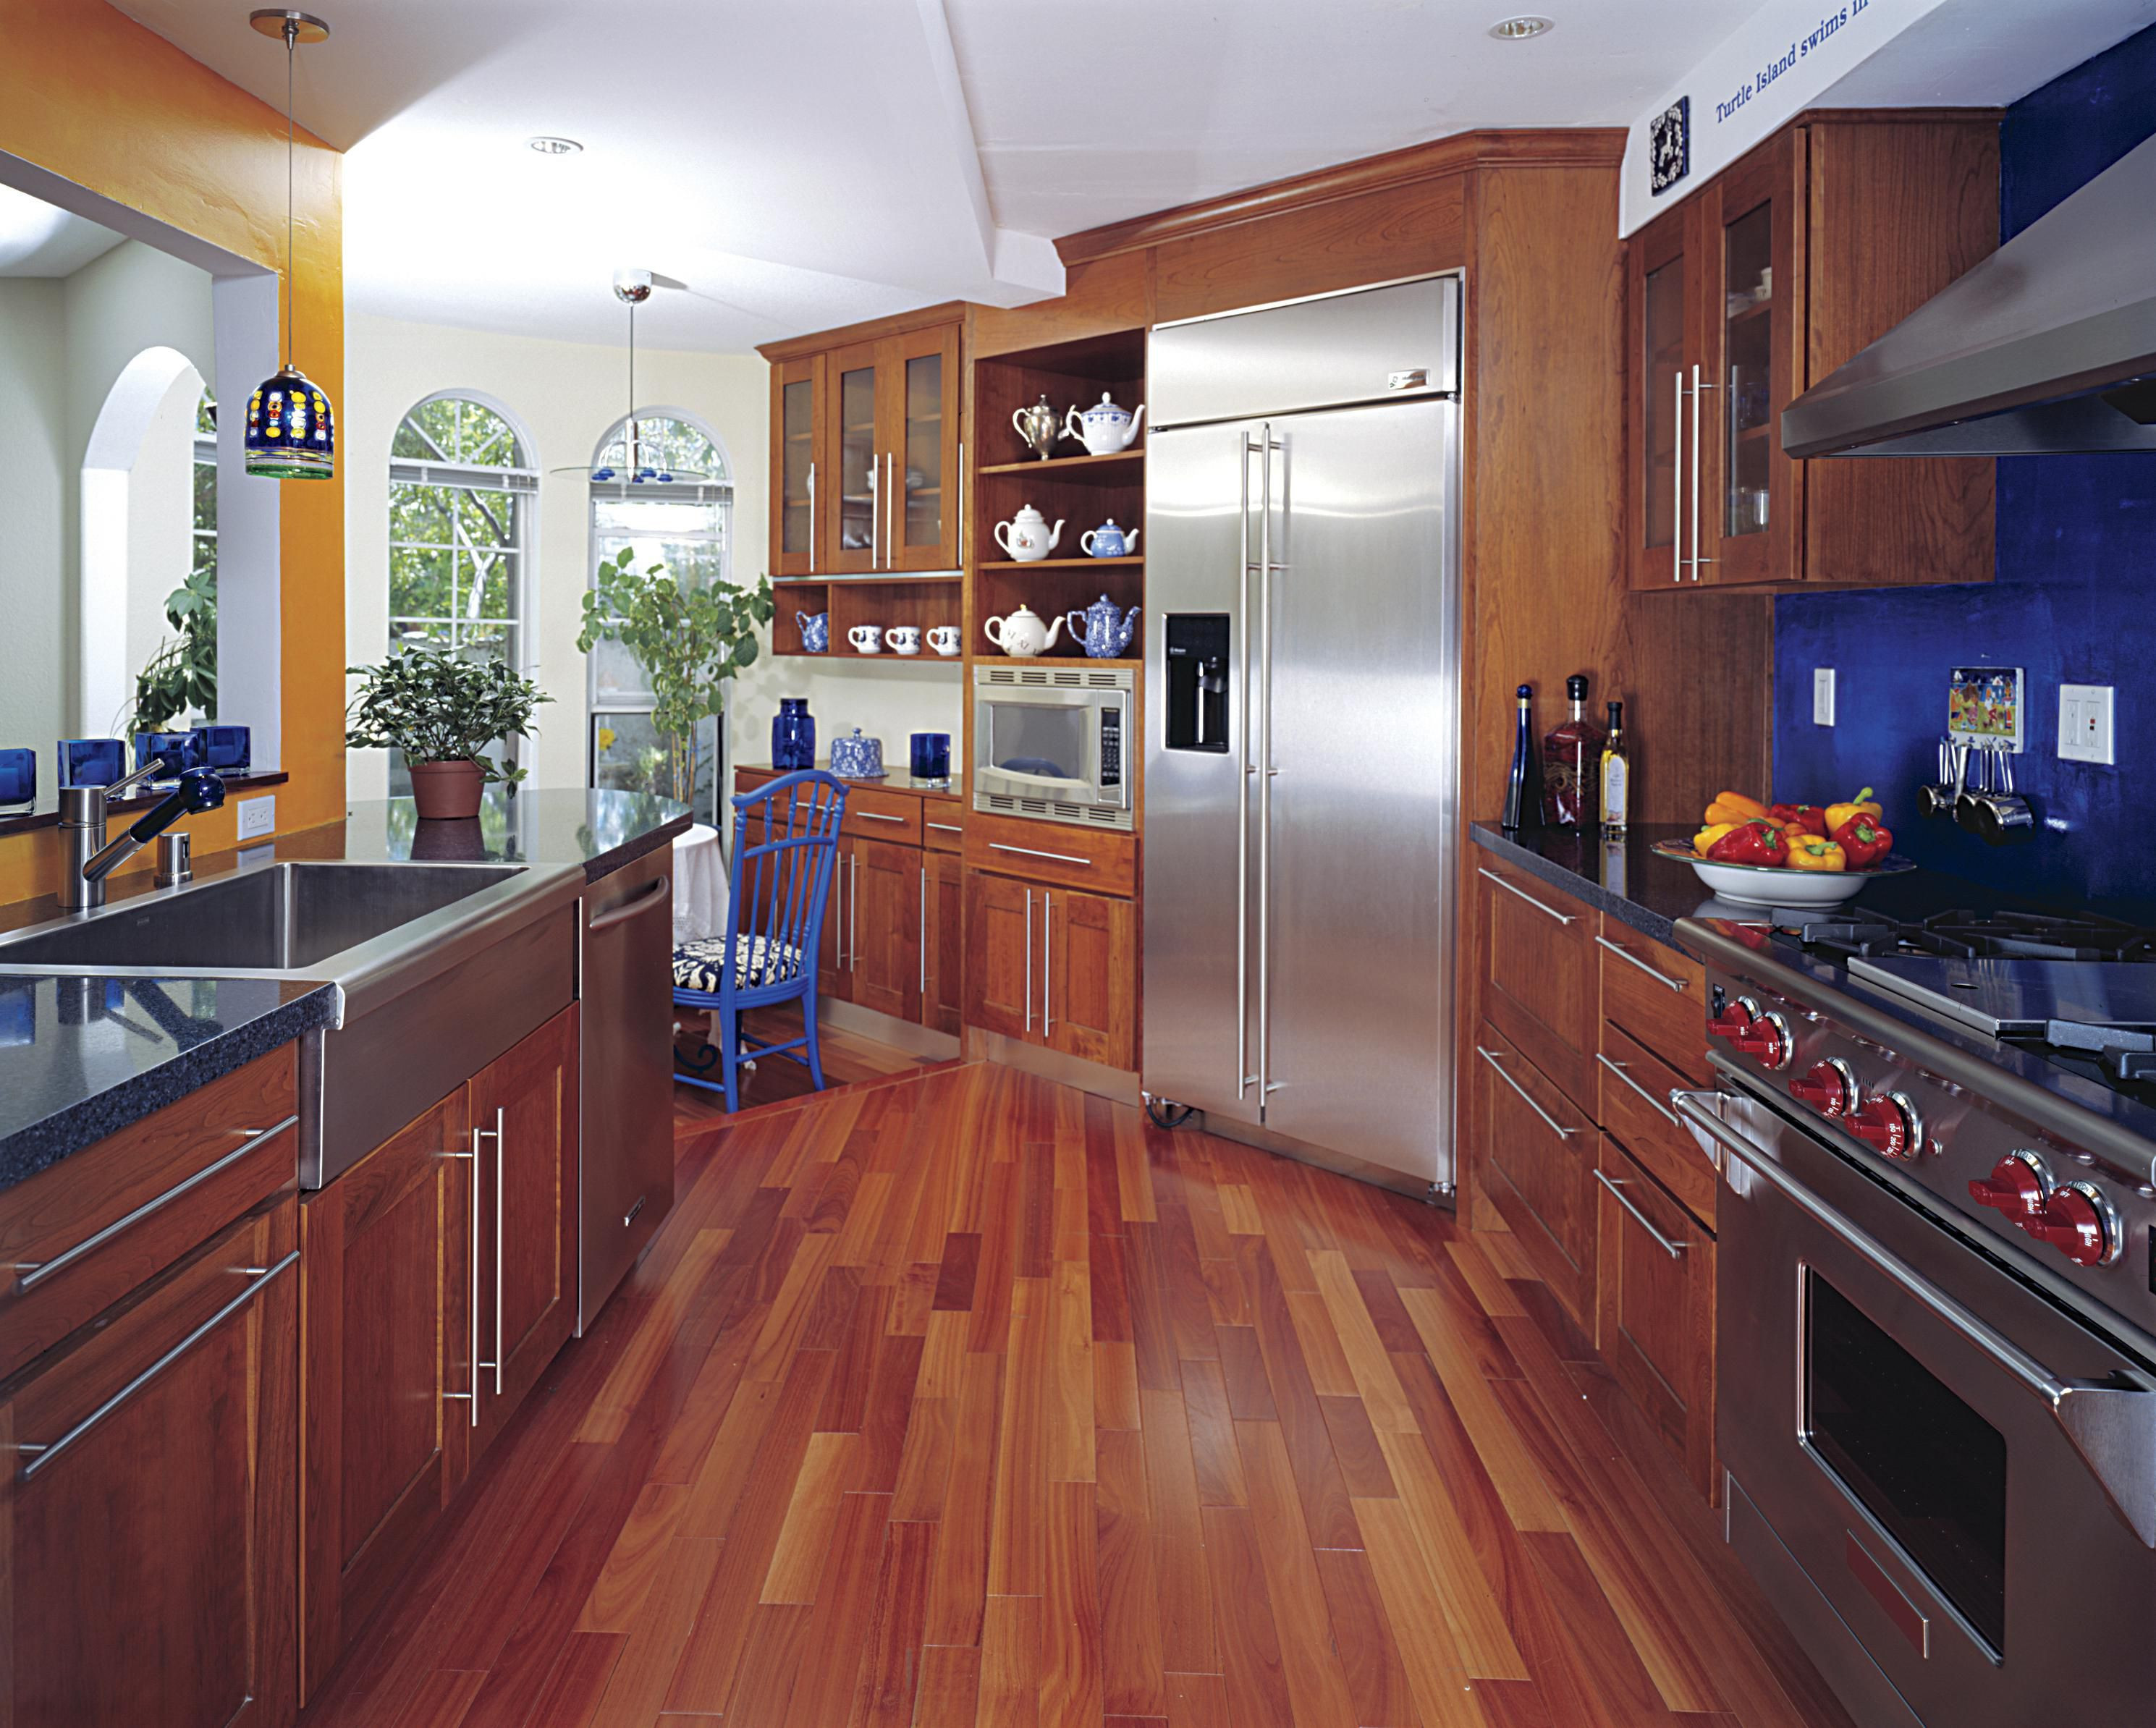 28 Elegant Old Hardwood Floor Ideas 2024 free download old hardwood floor ideas of hardwood floor in a kitchen is this allowed within 186828472 56a49f3a5f9b58b7d0d7e142